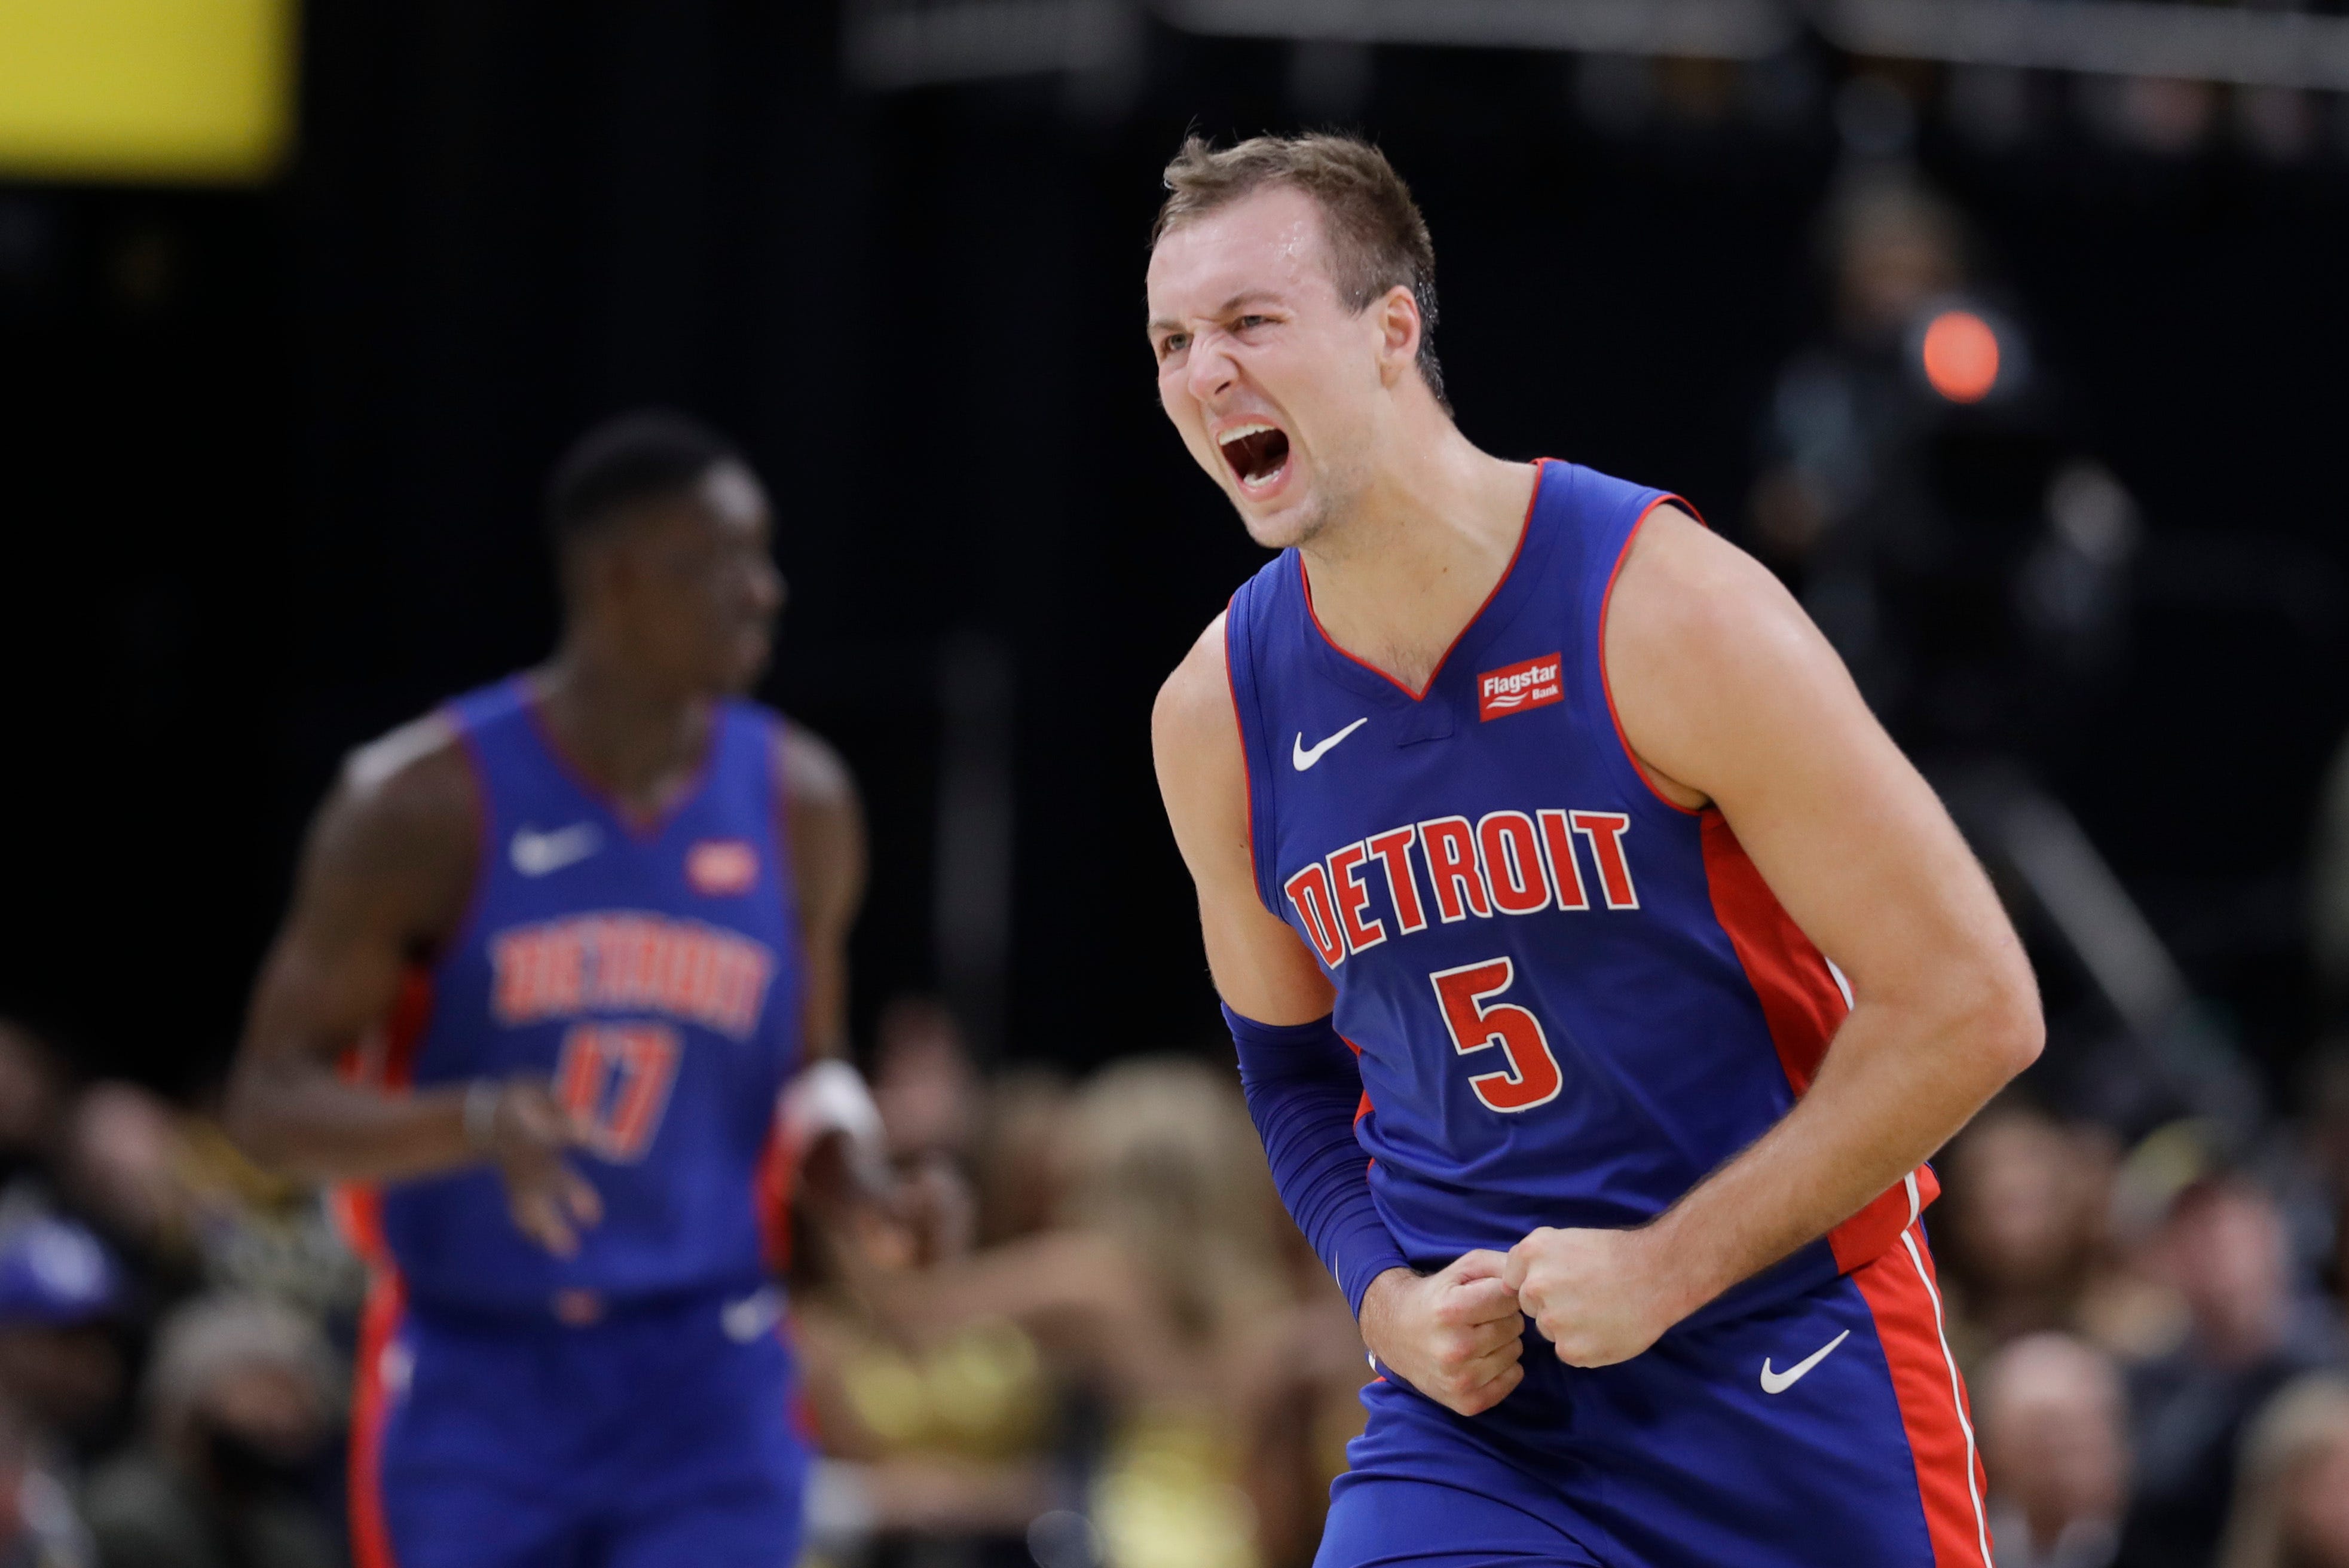 Detroit Pistons ' Luke Kennard reacts after hitting a shot during the second half against the Indiana Pacers on Wednesday, Oct. 23, 2019, in Indianapolis. Detroit won the season opener, 119-110.